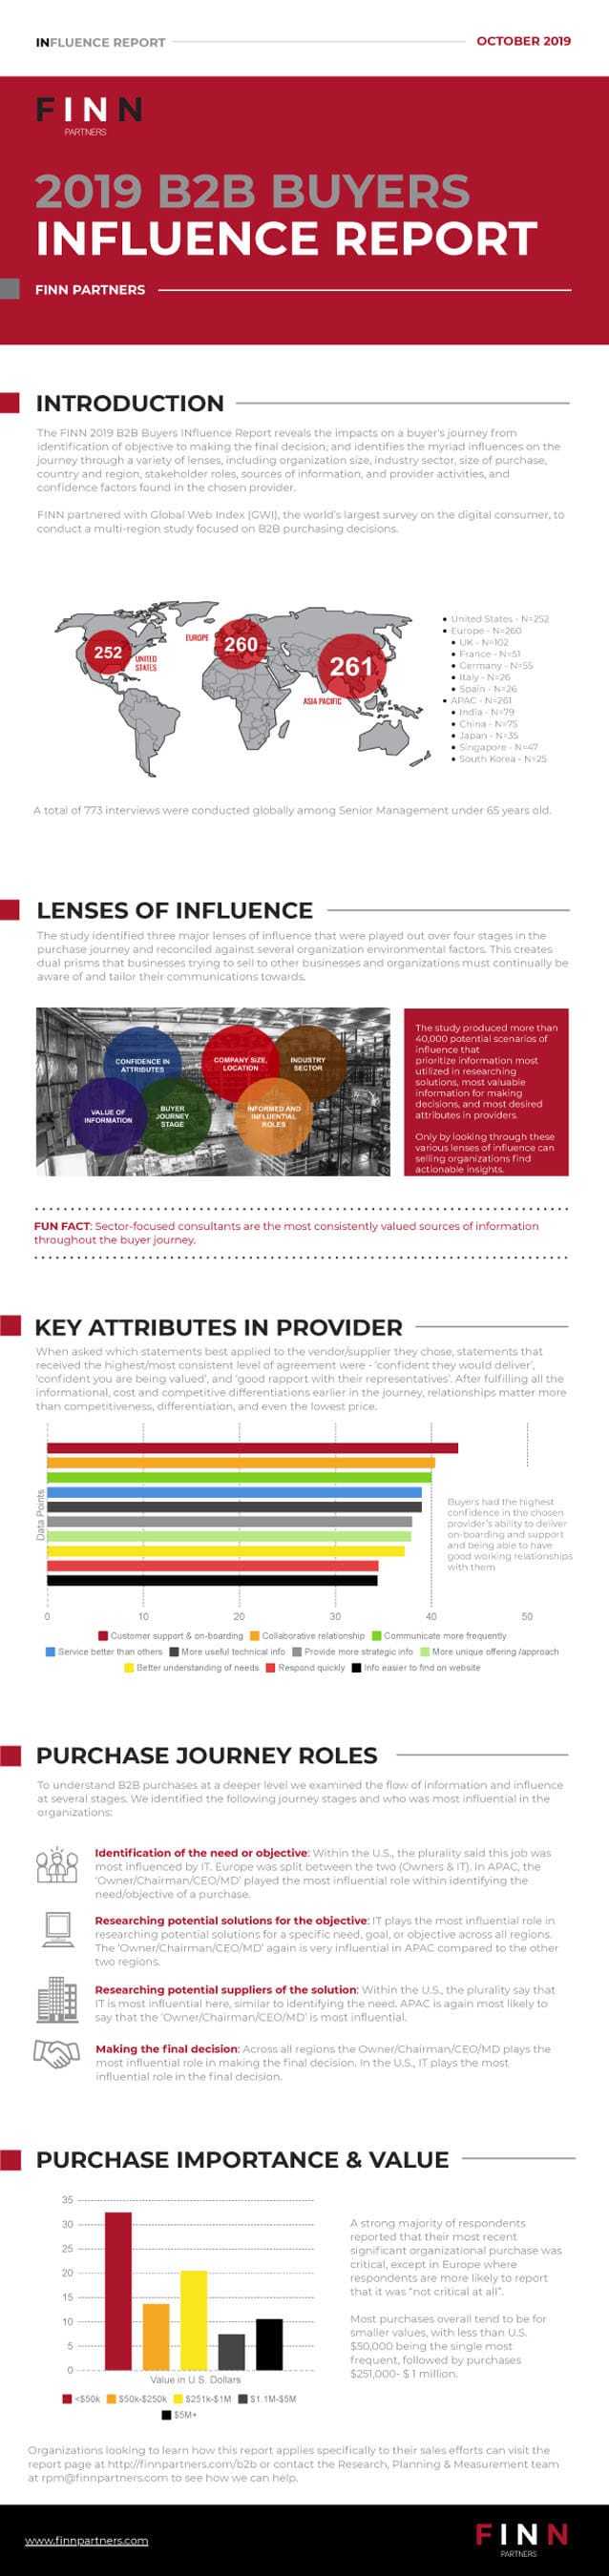 New Finn report unveils key factors that influence B2B purchasing decision makers